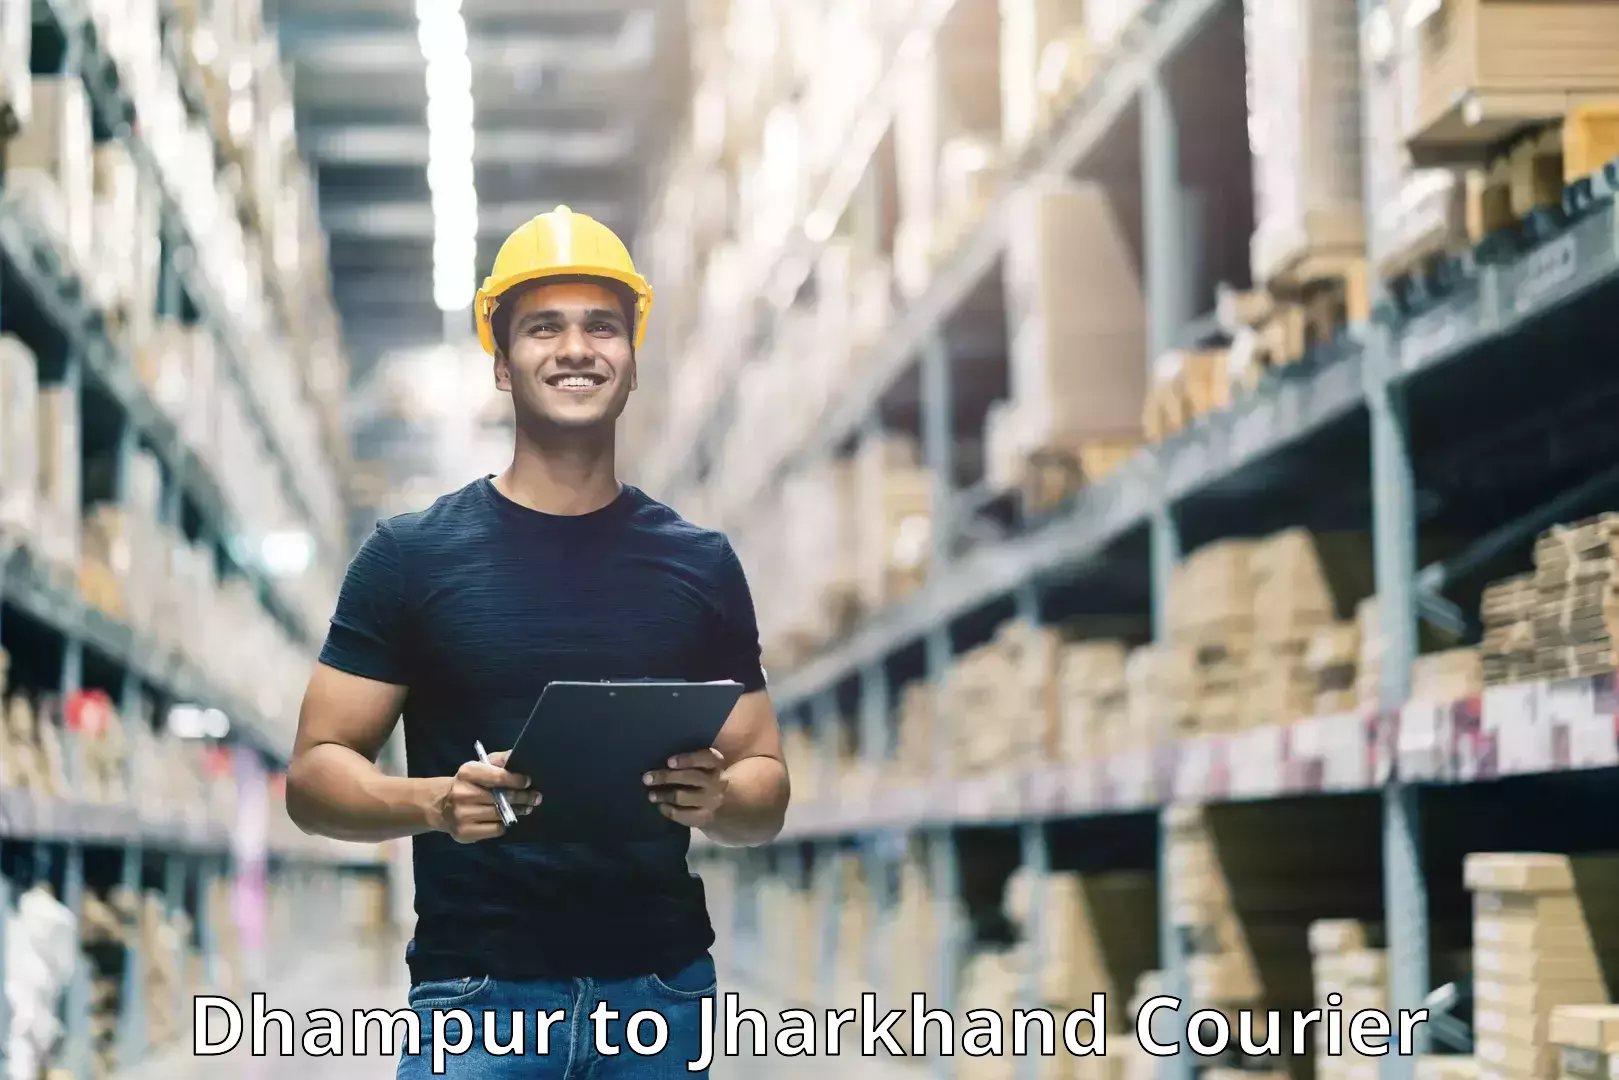 Efficient order fulfillment in Dhampur to Latehar